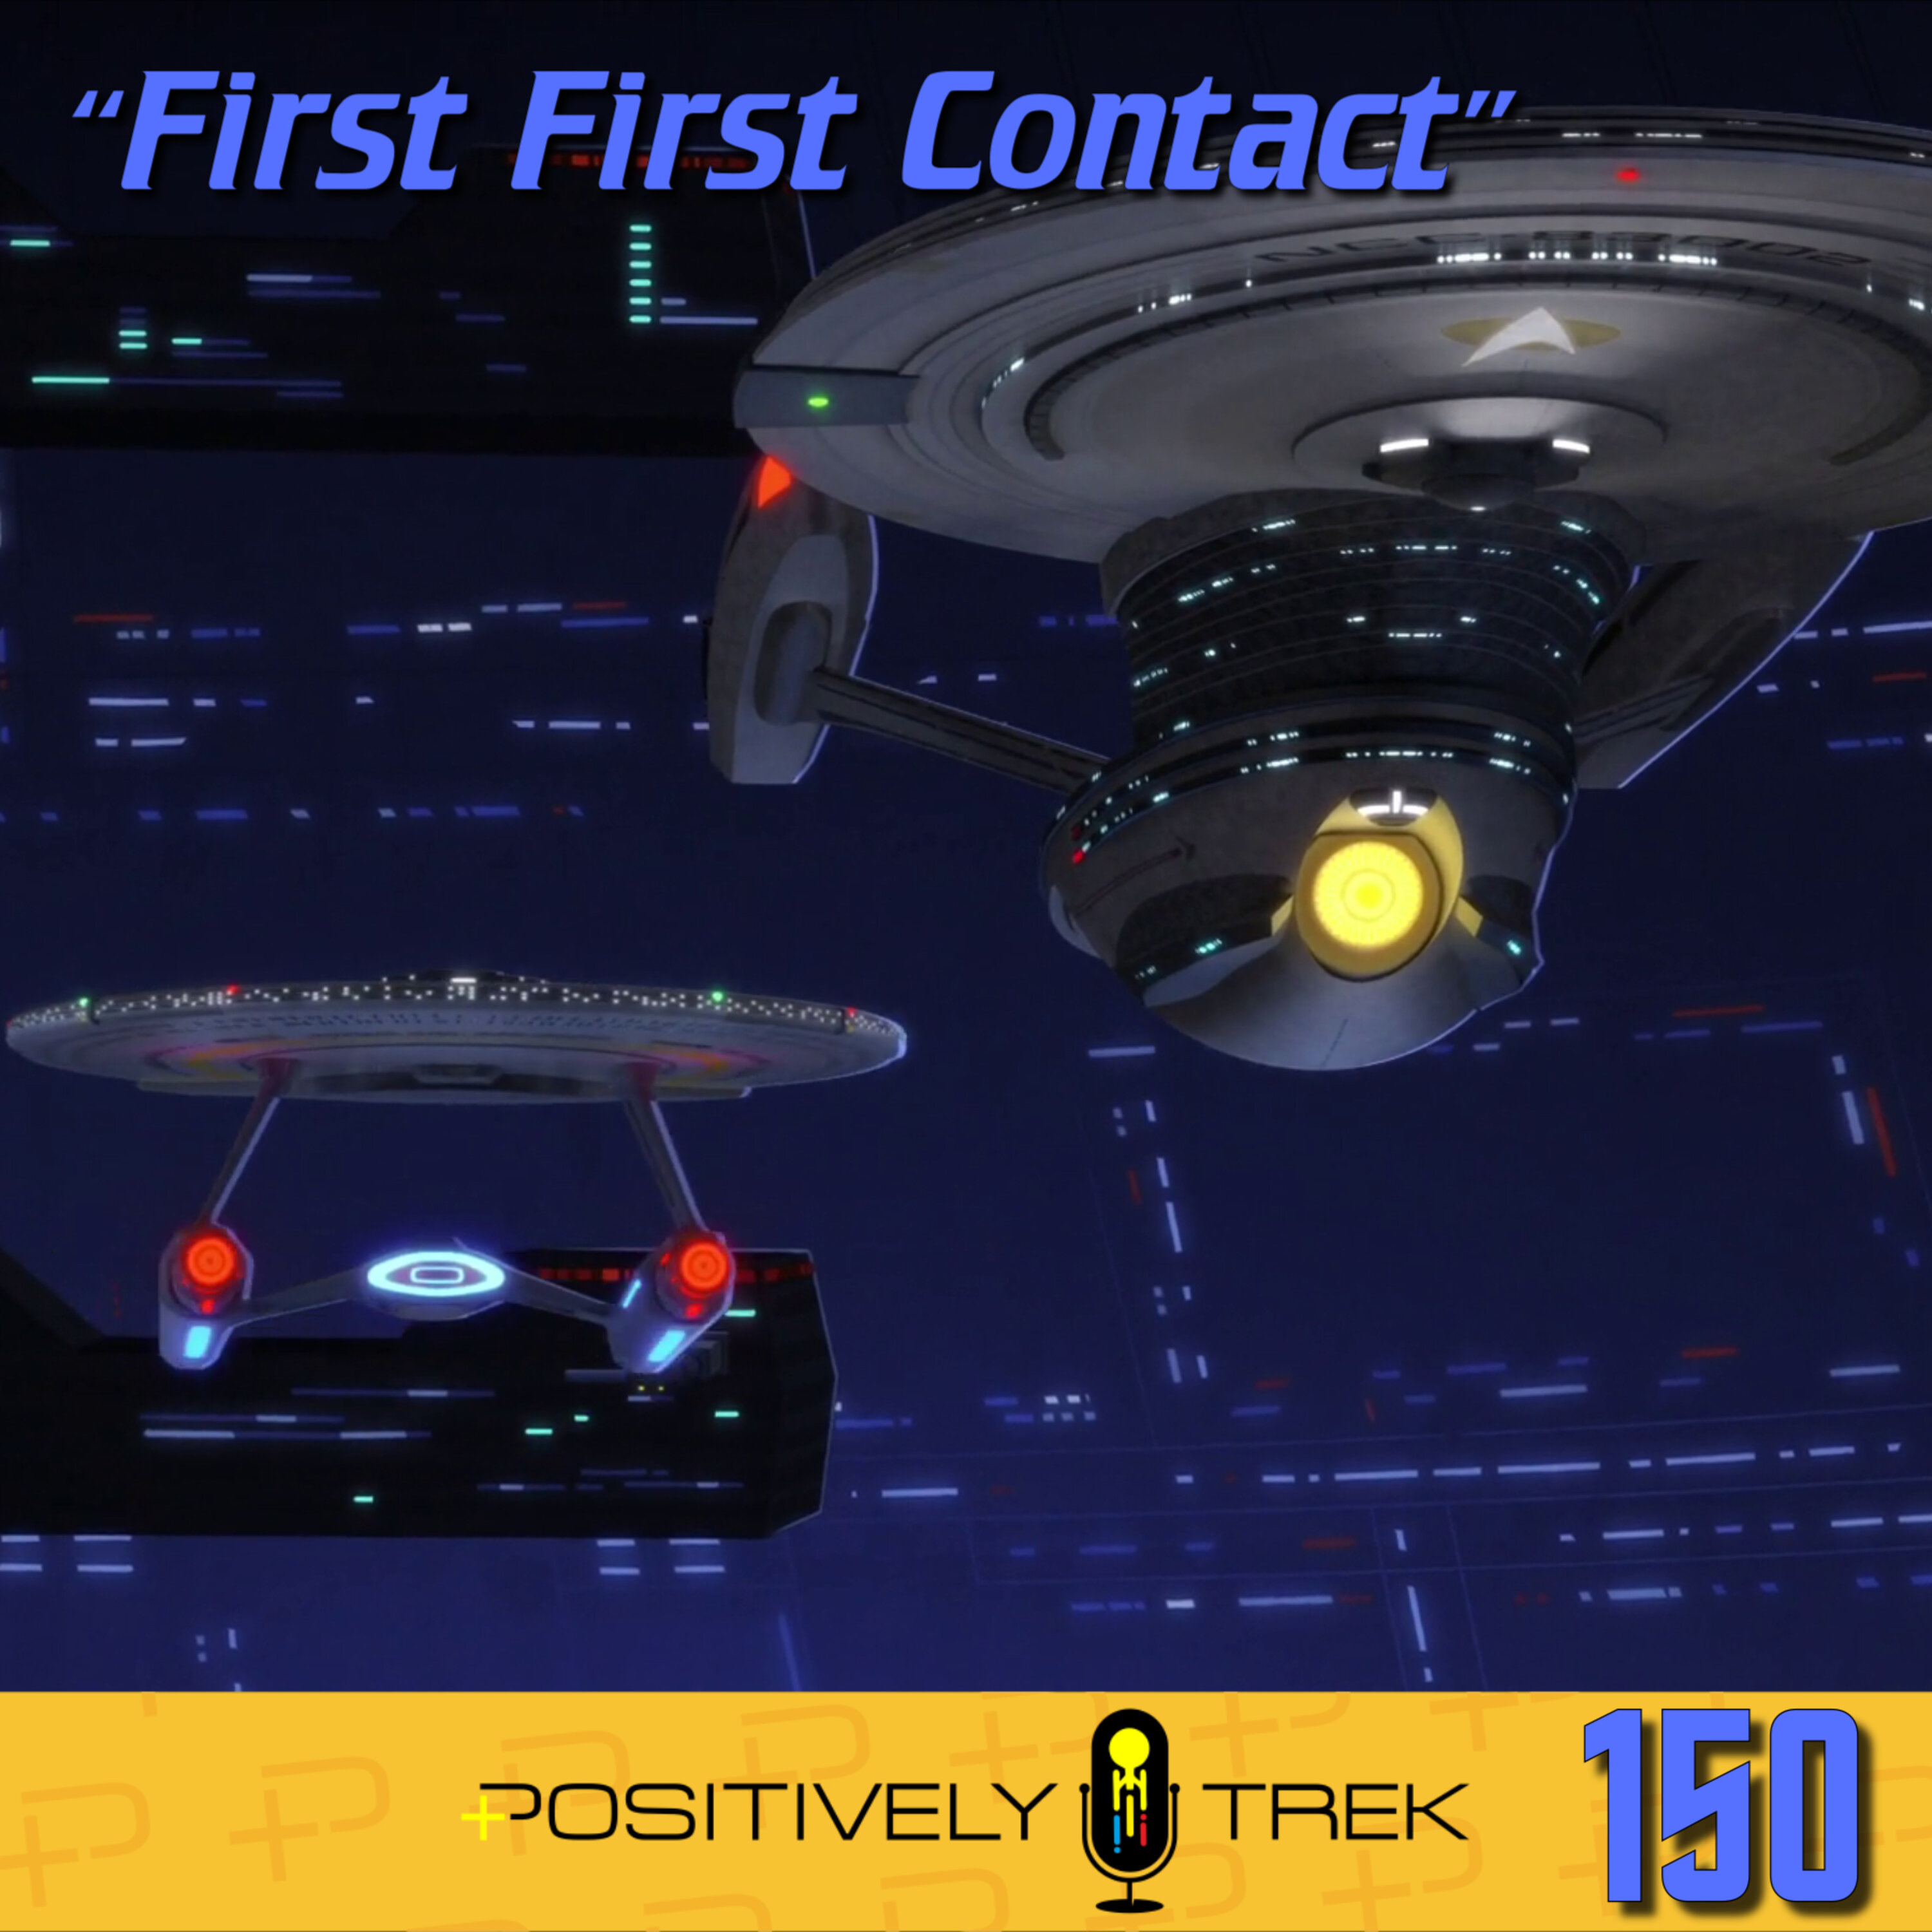 Lower Decks Review: “First First Contact” (Season 2 Finale!) Image